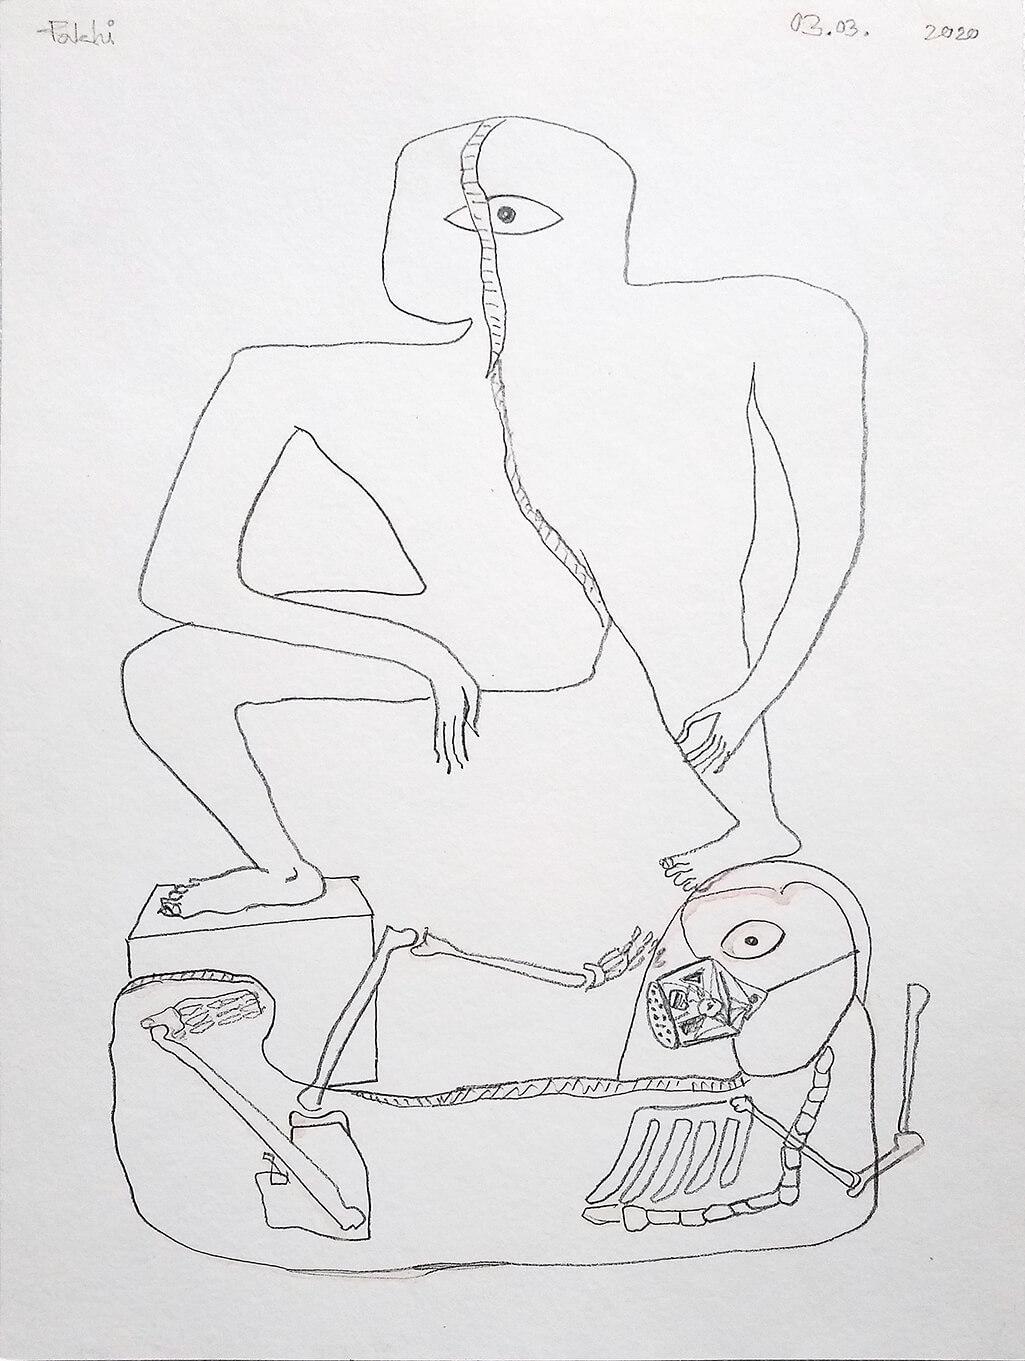 Subrata Biswas Animal Painting - Figurative, Charcoal on Paper, Black & White by Contemporary Artist "In Stock"